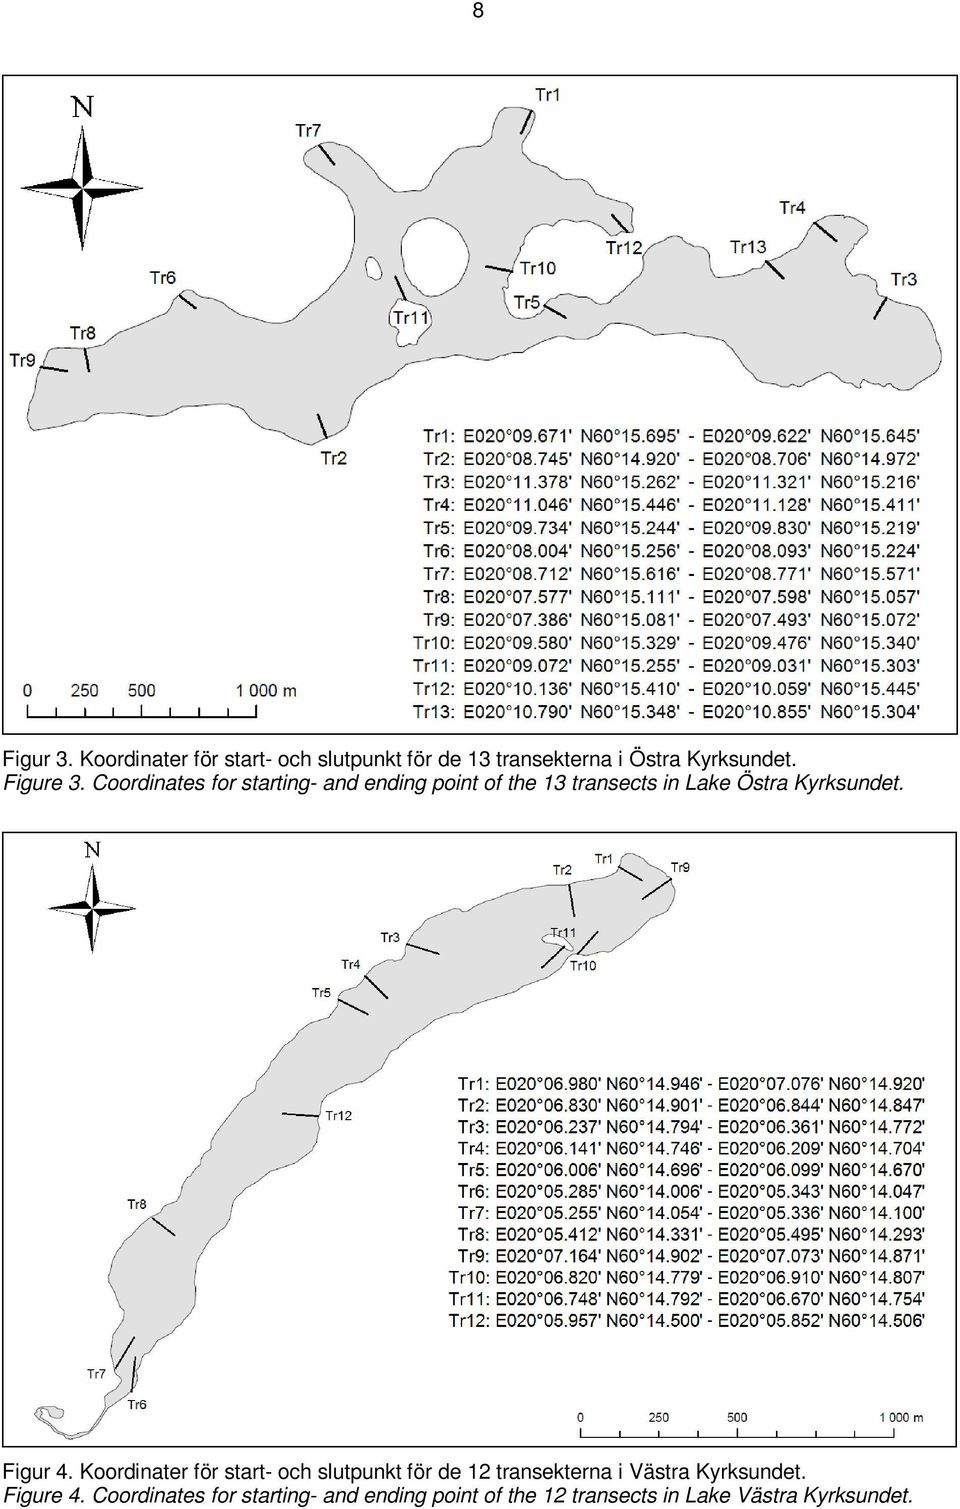 Coordinates for starting- and ending point of the 13 transects in Lake Östra Kyrksundet.